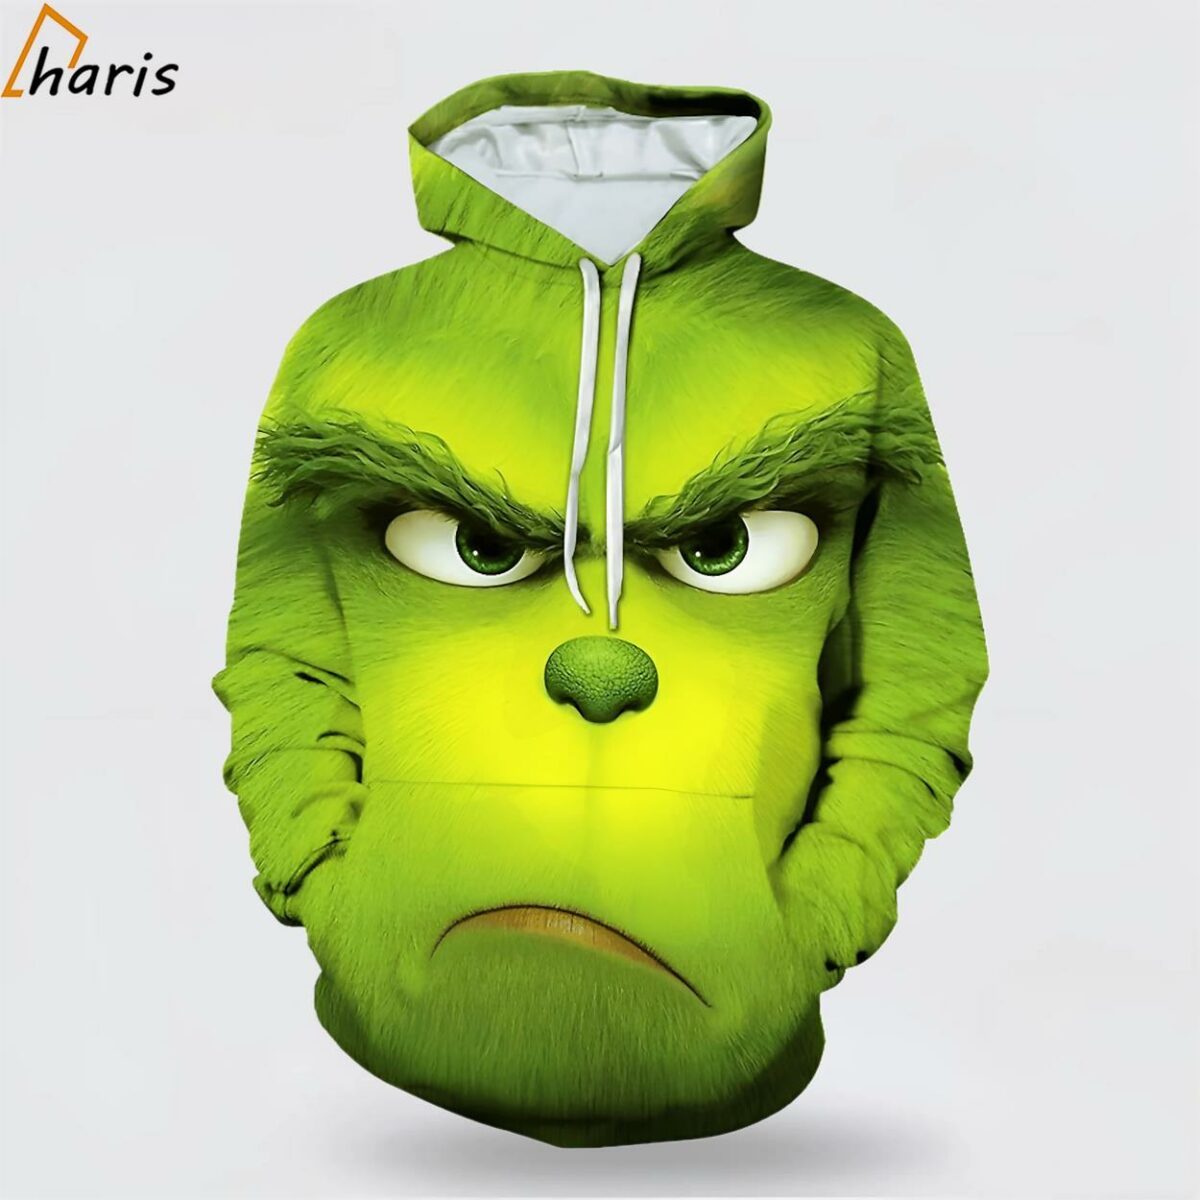 The Grinch Green Face Christmas 3D Hoodie 1 jersey